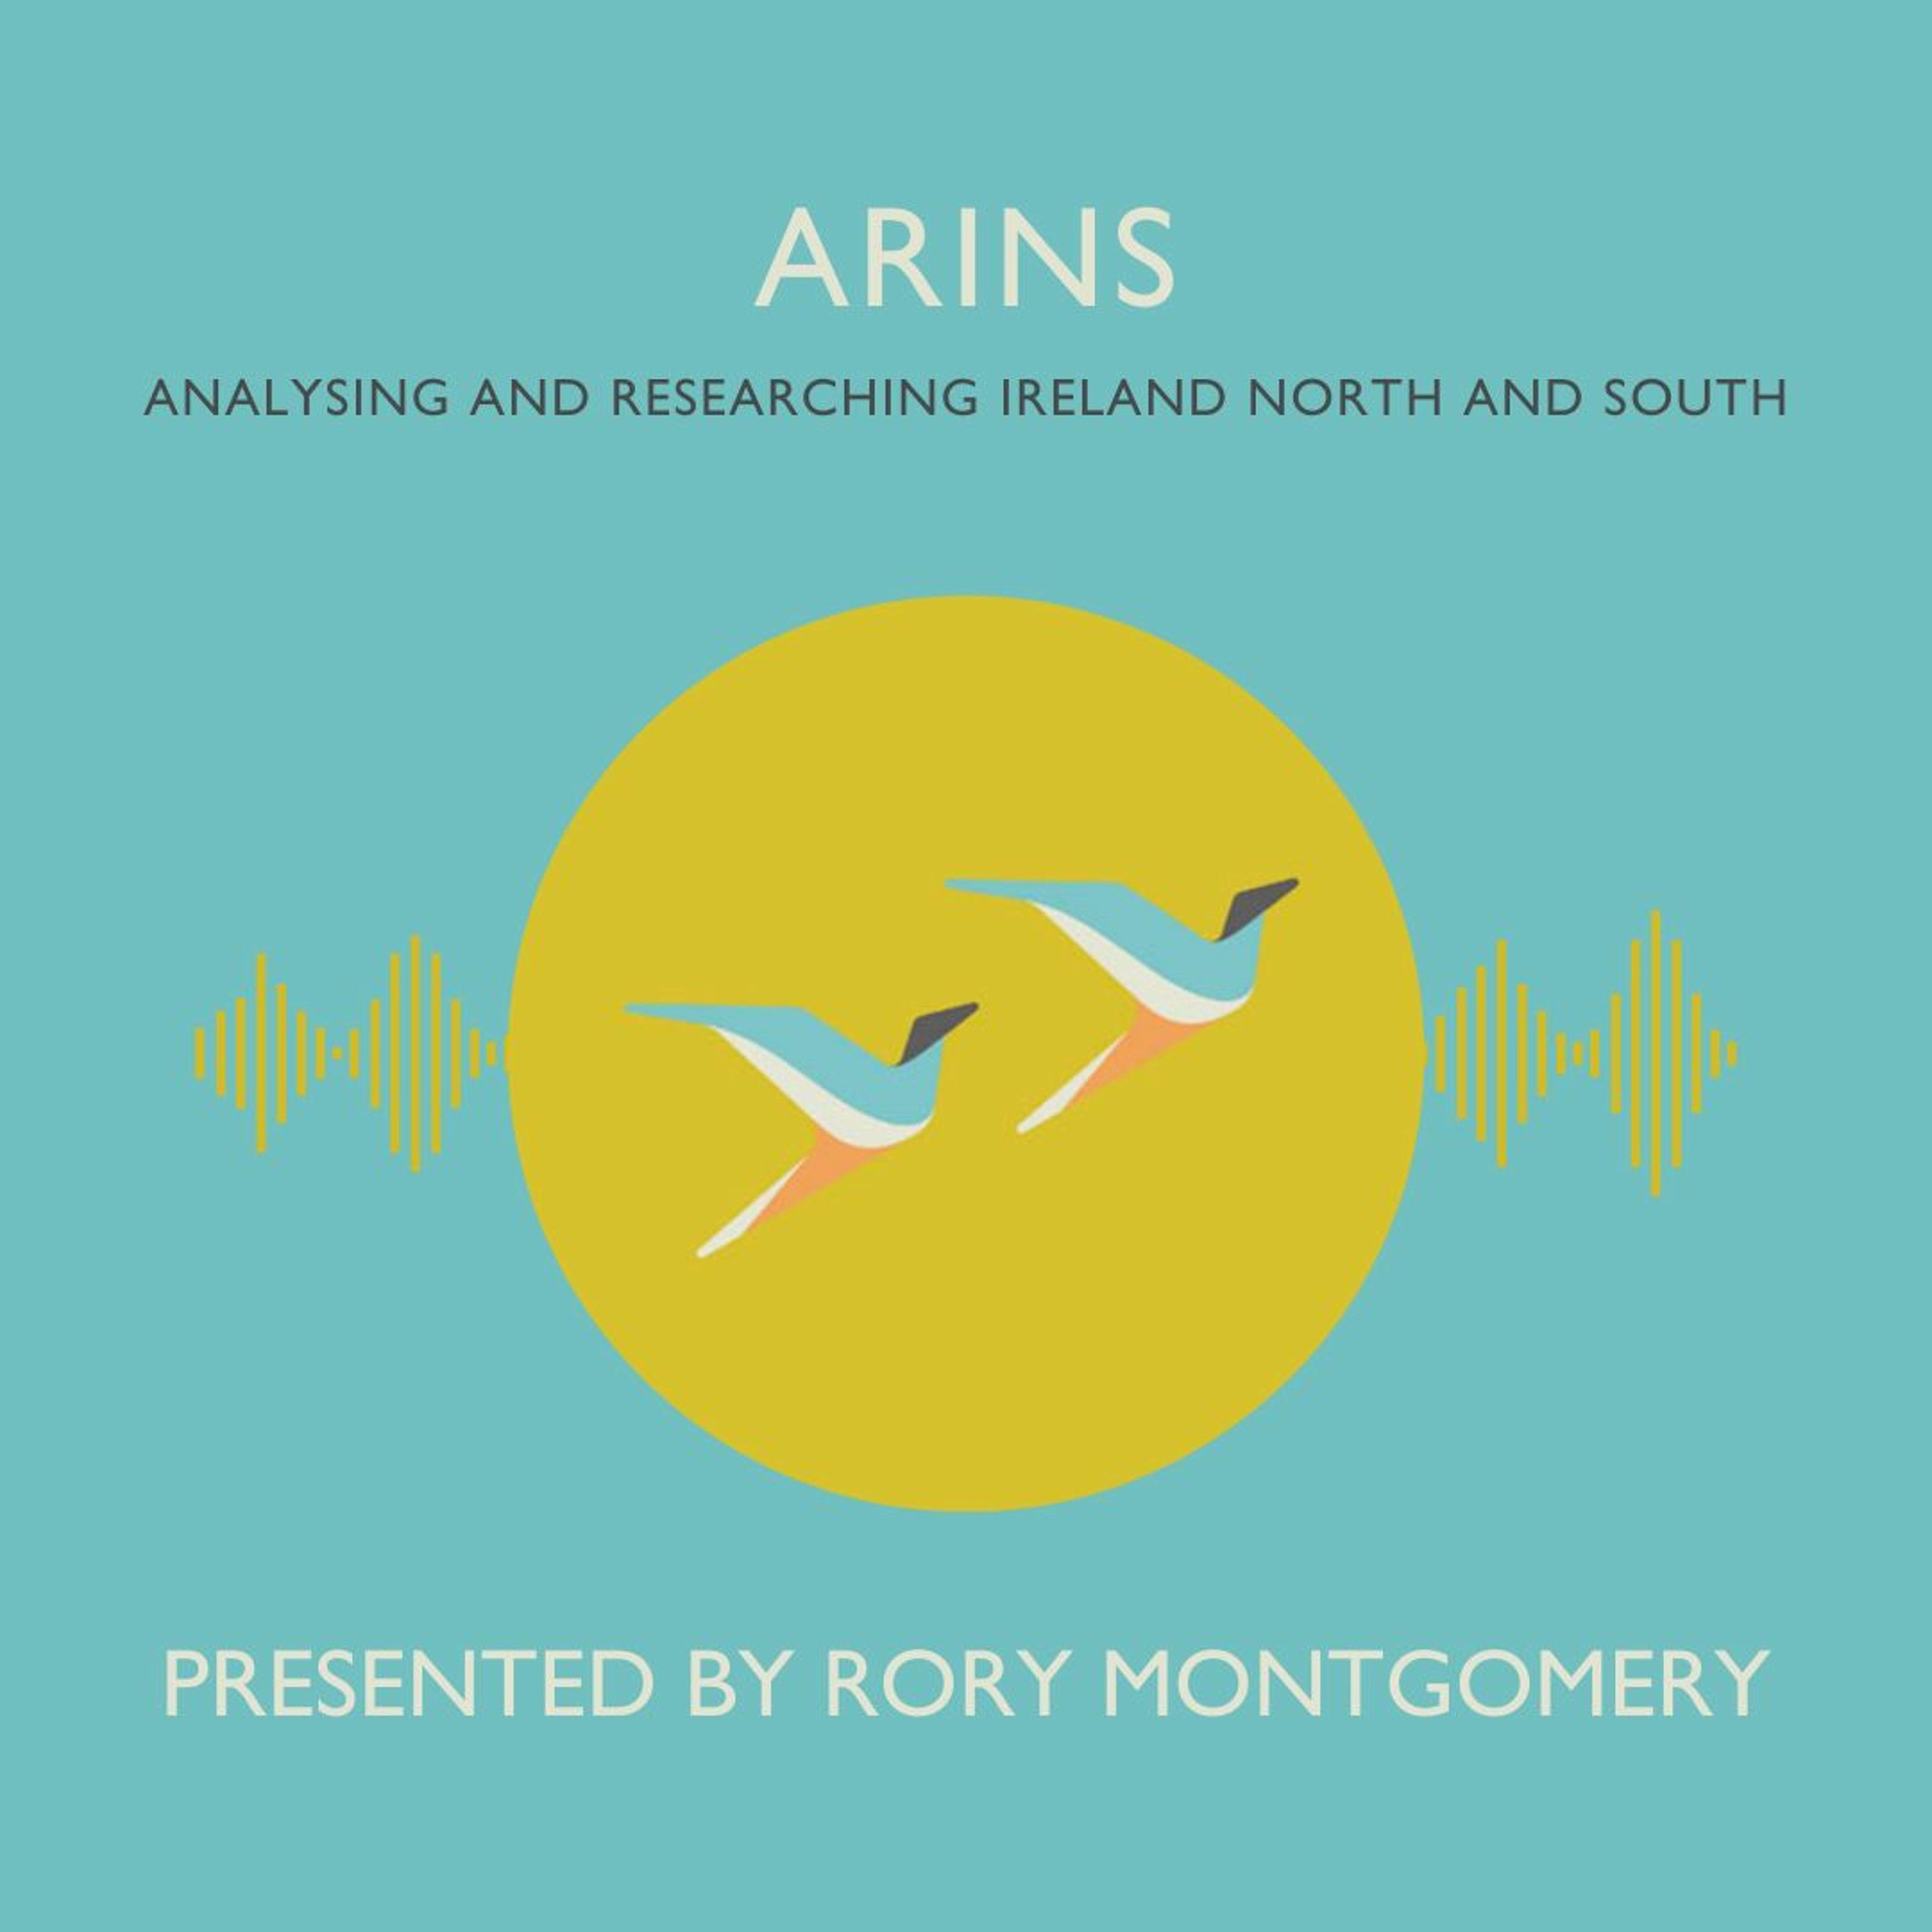 ARINS: ARINS/IT Survey - why do we focus on focus groups?